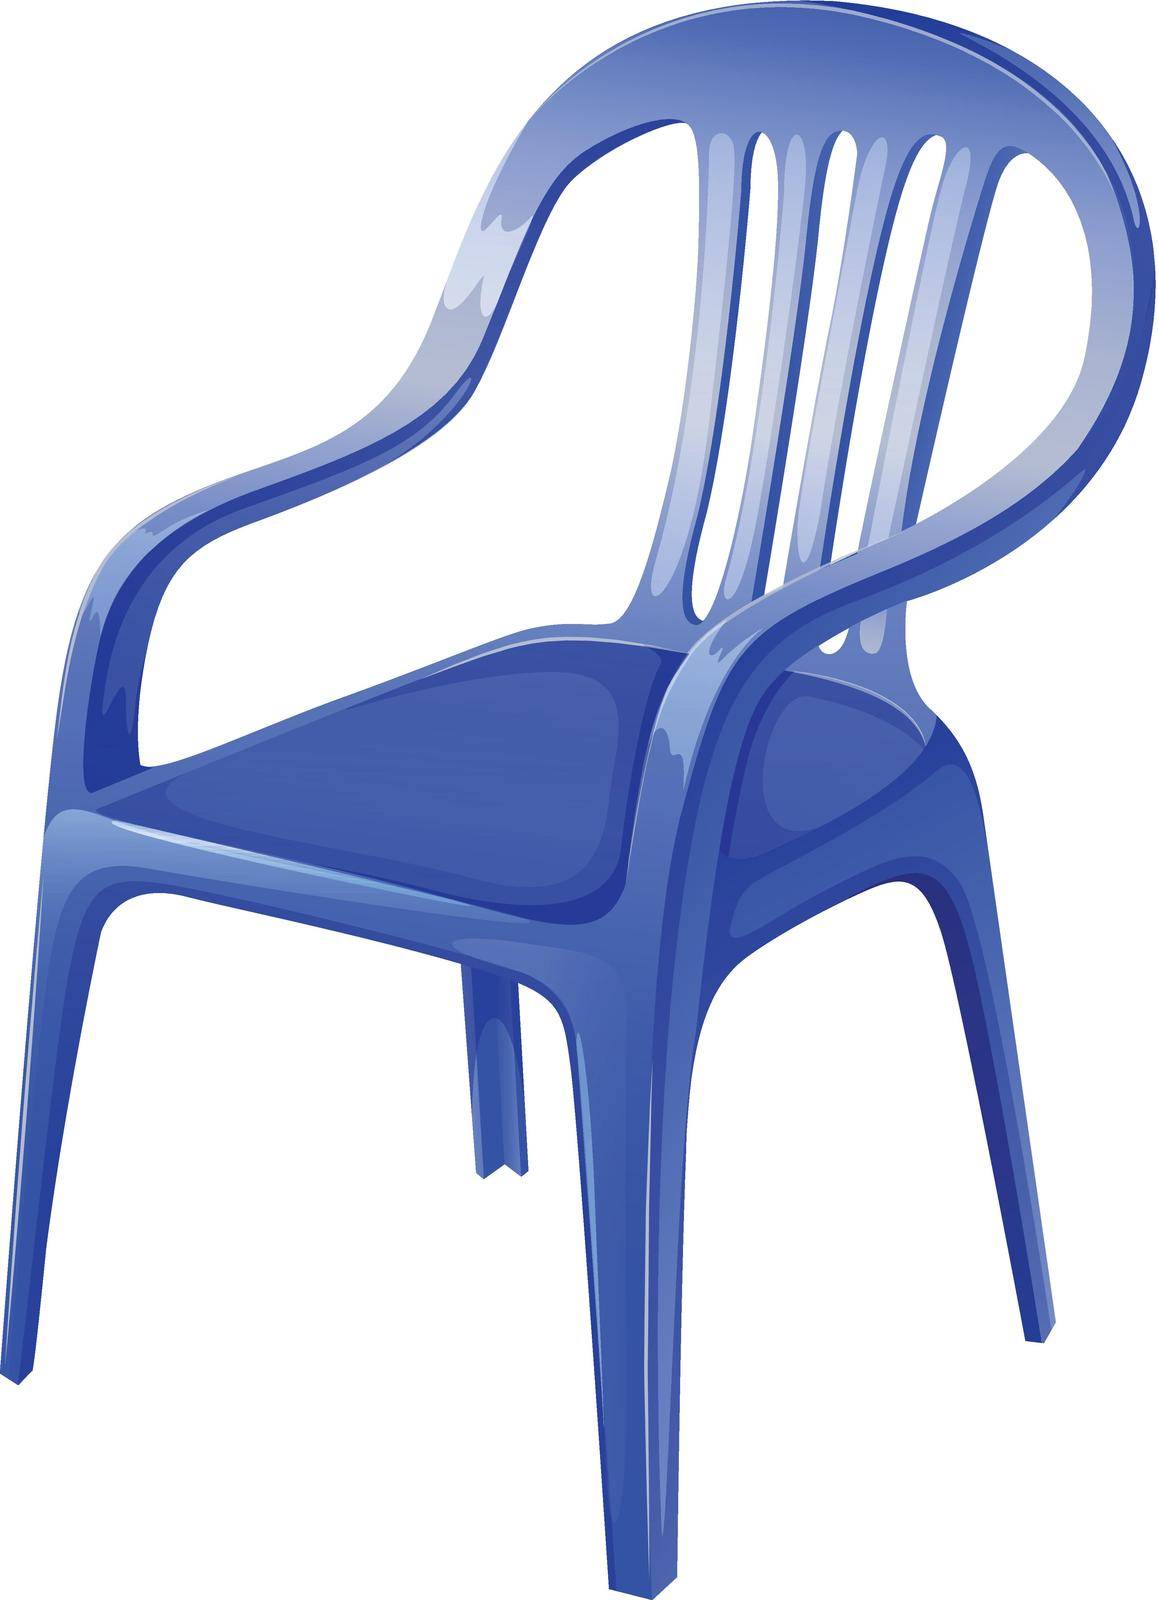 Illustration of a blue chair on a white background